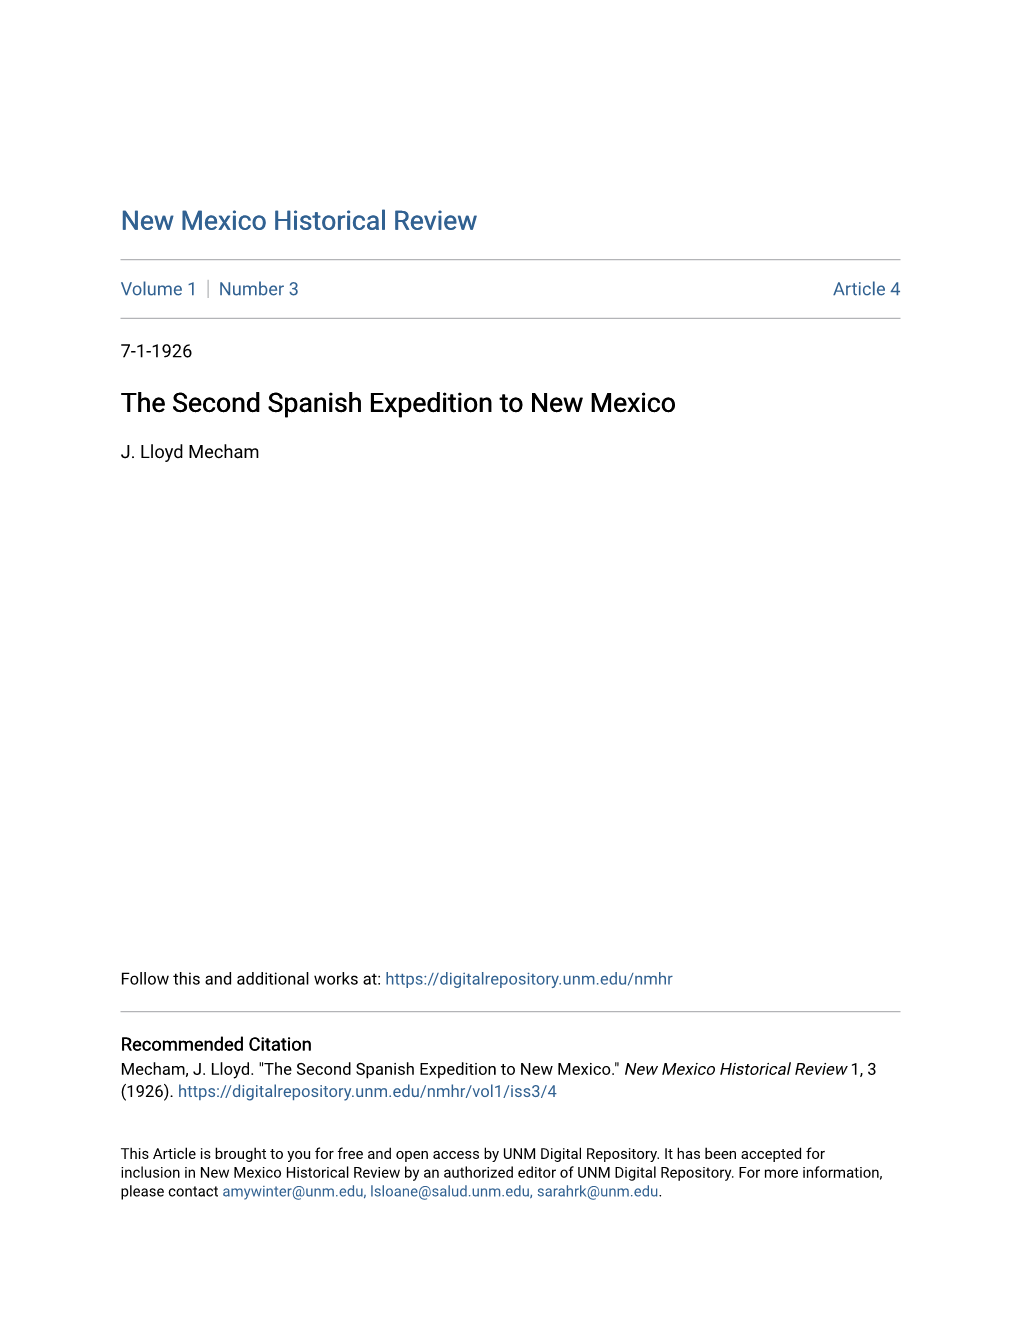 The Second Spanish Expedition to New Mexico